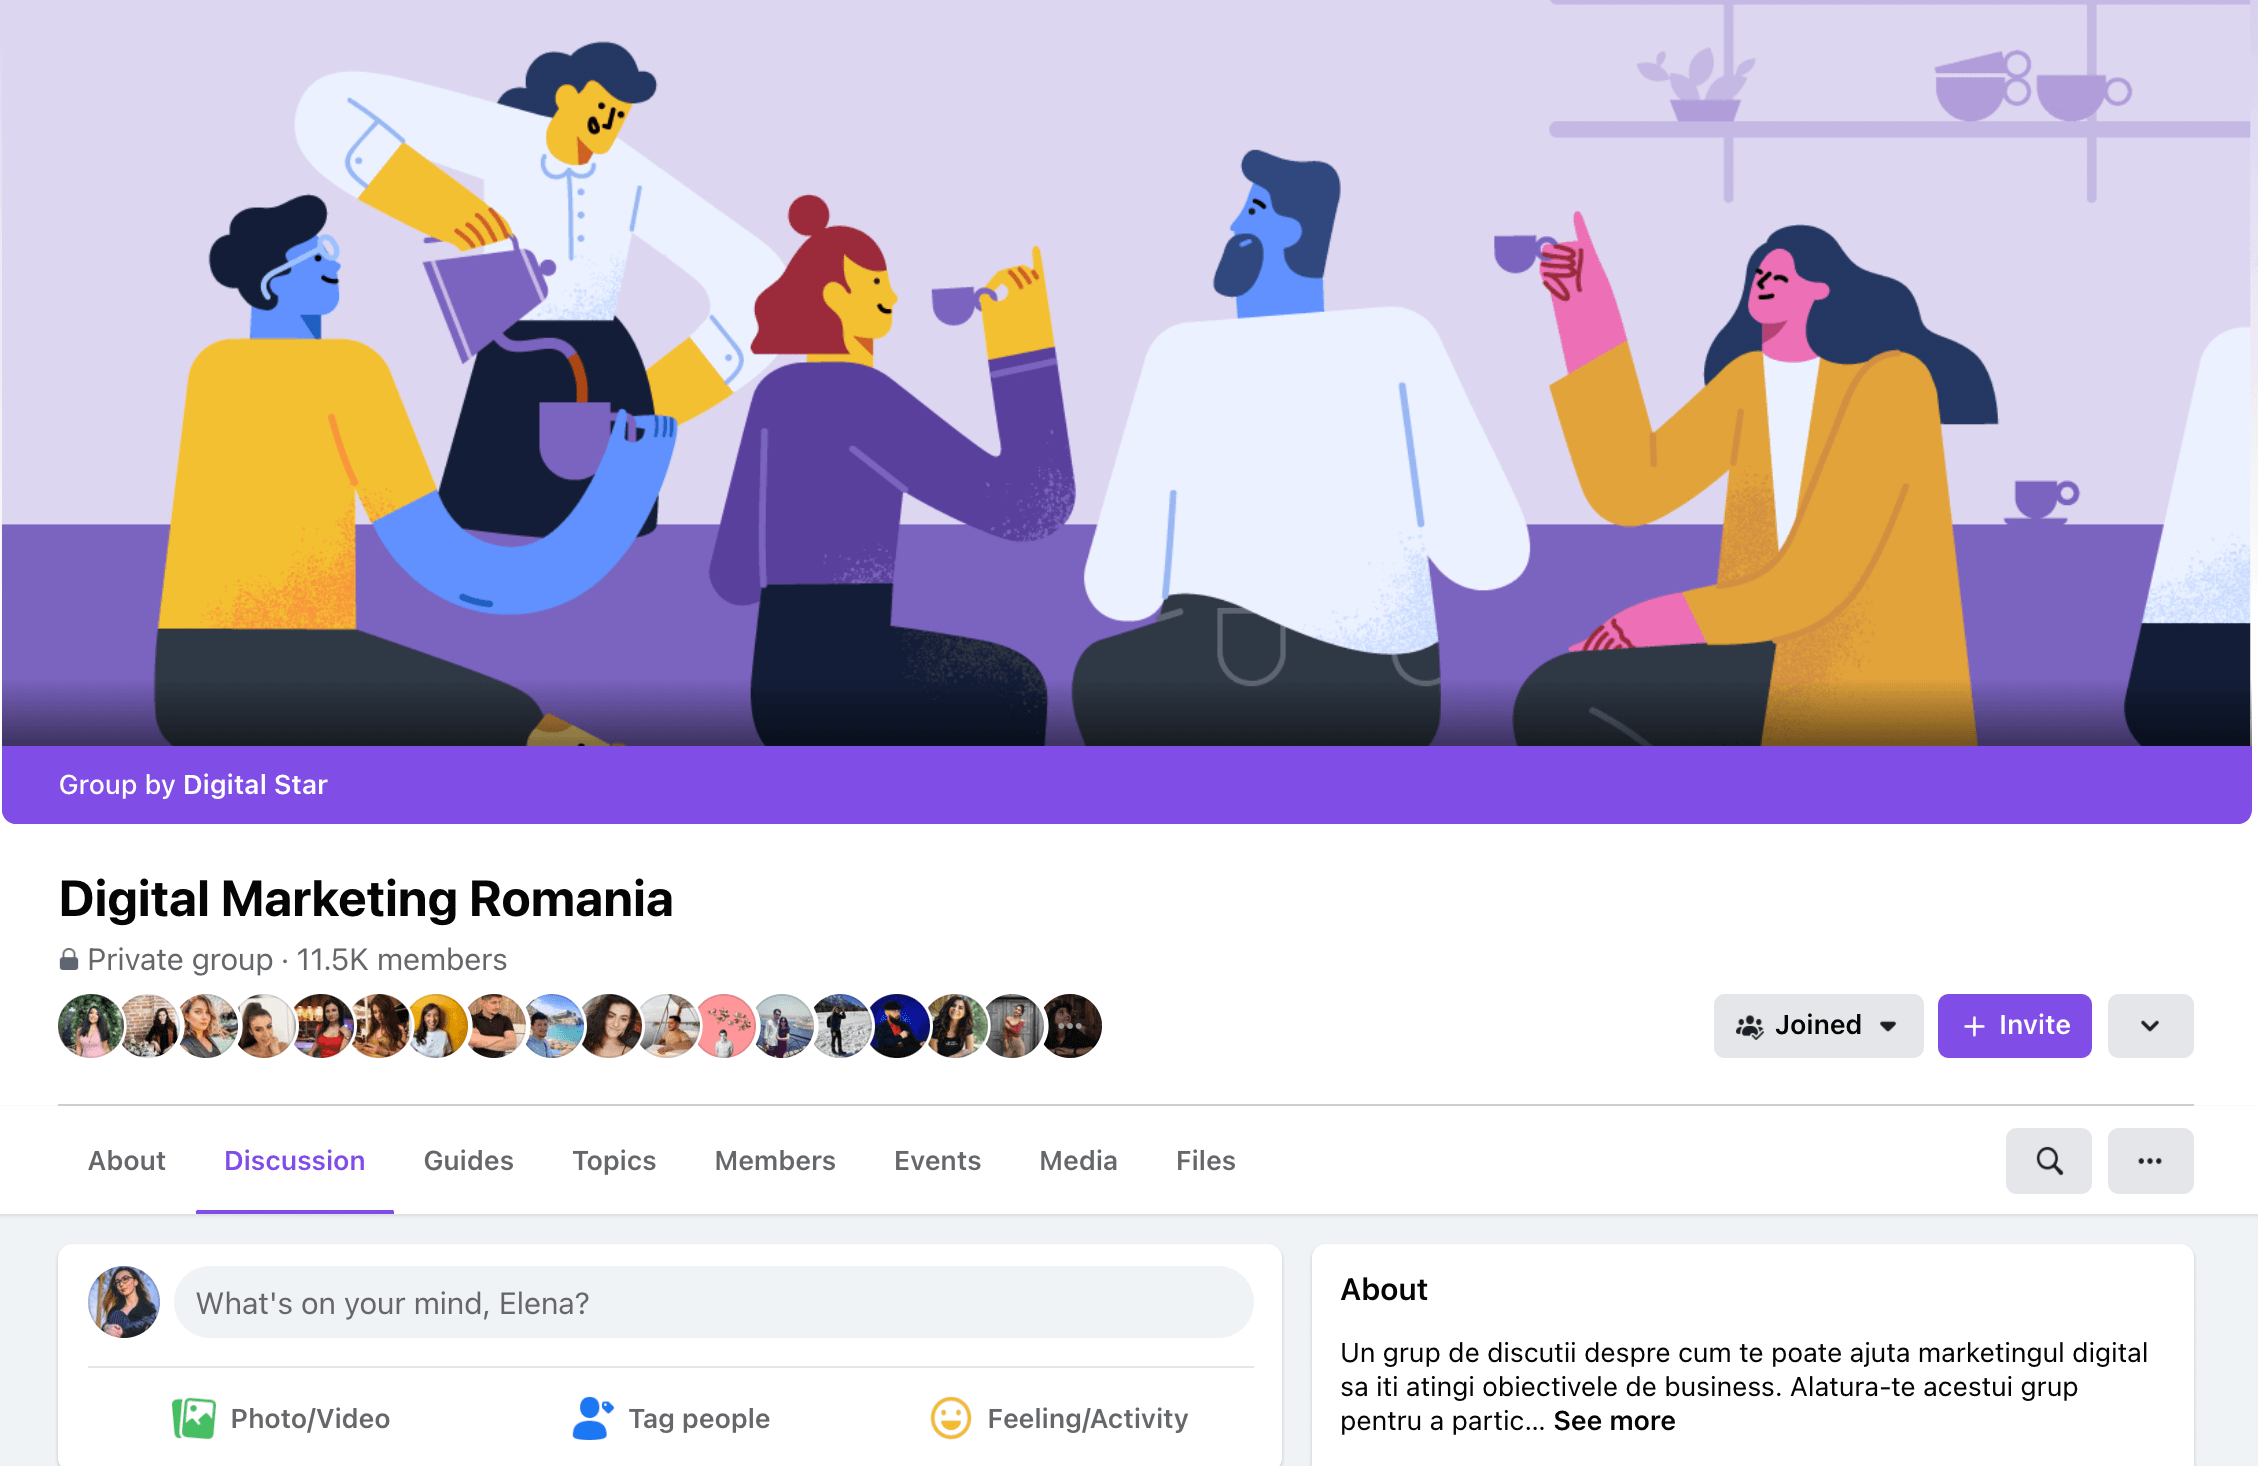 This is an example of how a Facebook group is displayed in the platform.